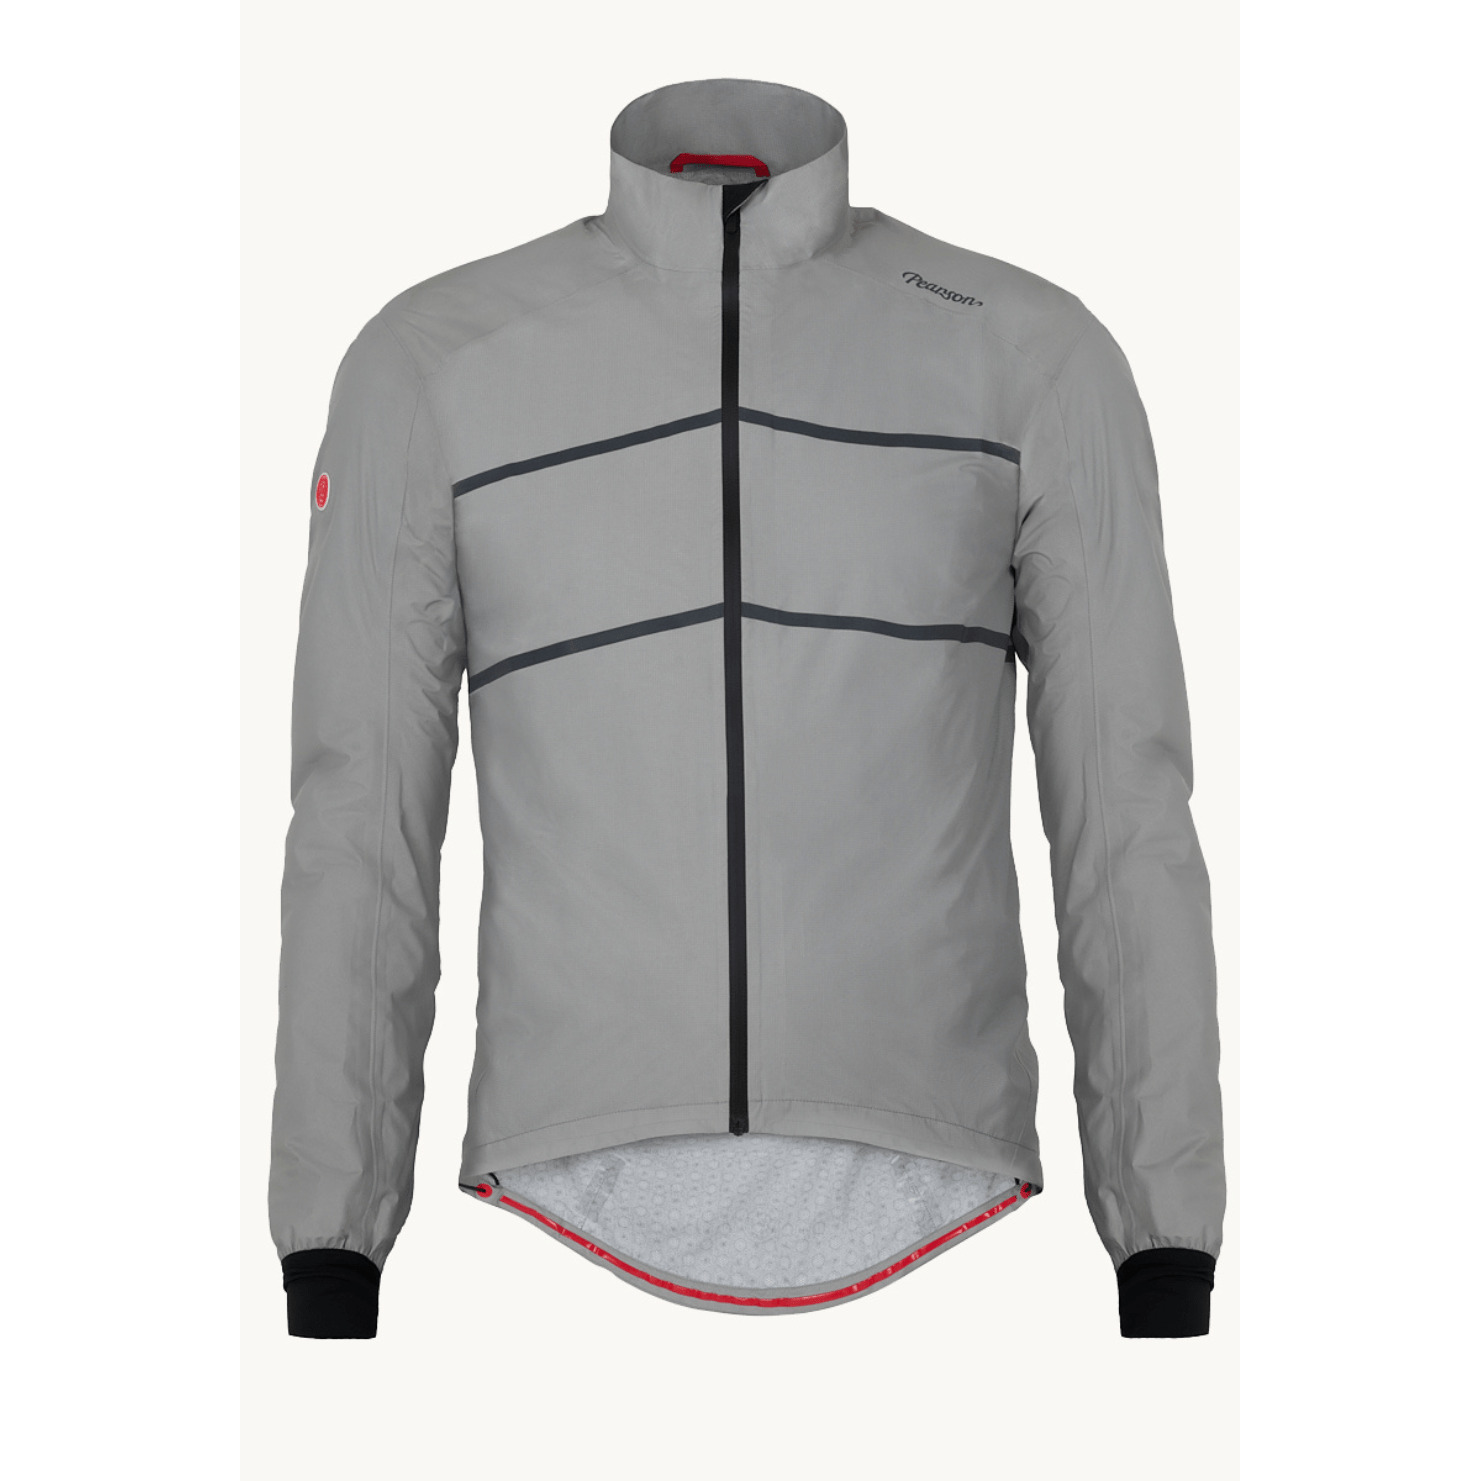 Pearson 1860, Bryter Layter - Waterproof Jacket | Choice of colours | A highly breathable, lightweight and fully waterproof jacket designed for all kinds of riding.